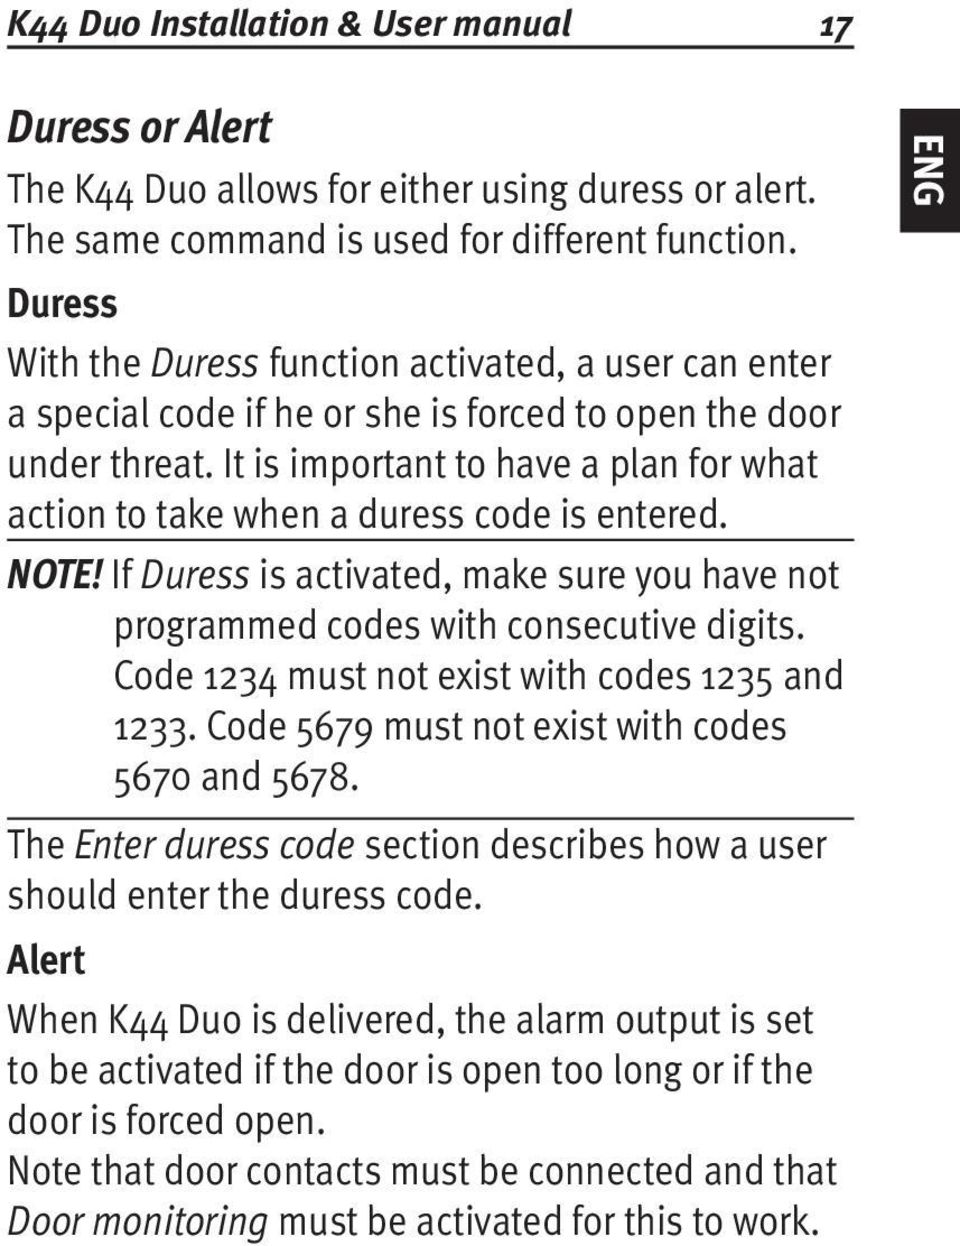 It is important to have a plan for what action to take when a duress code is entered. Note! If Duress is activated, make sure you have not programmed codes with consecutive digits.